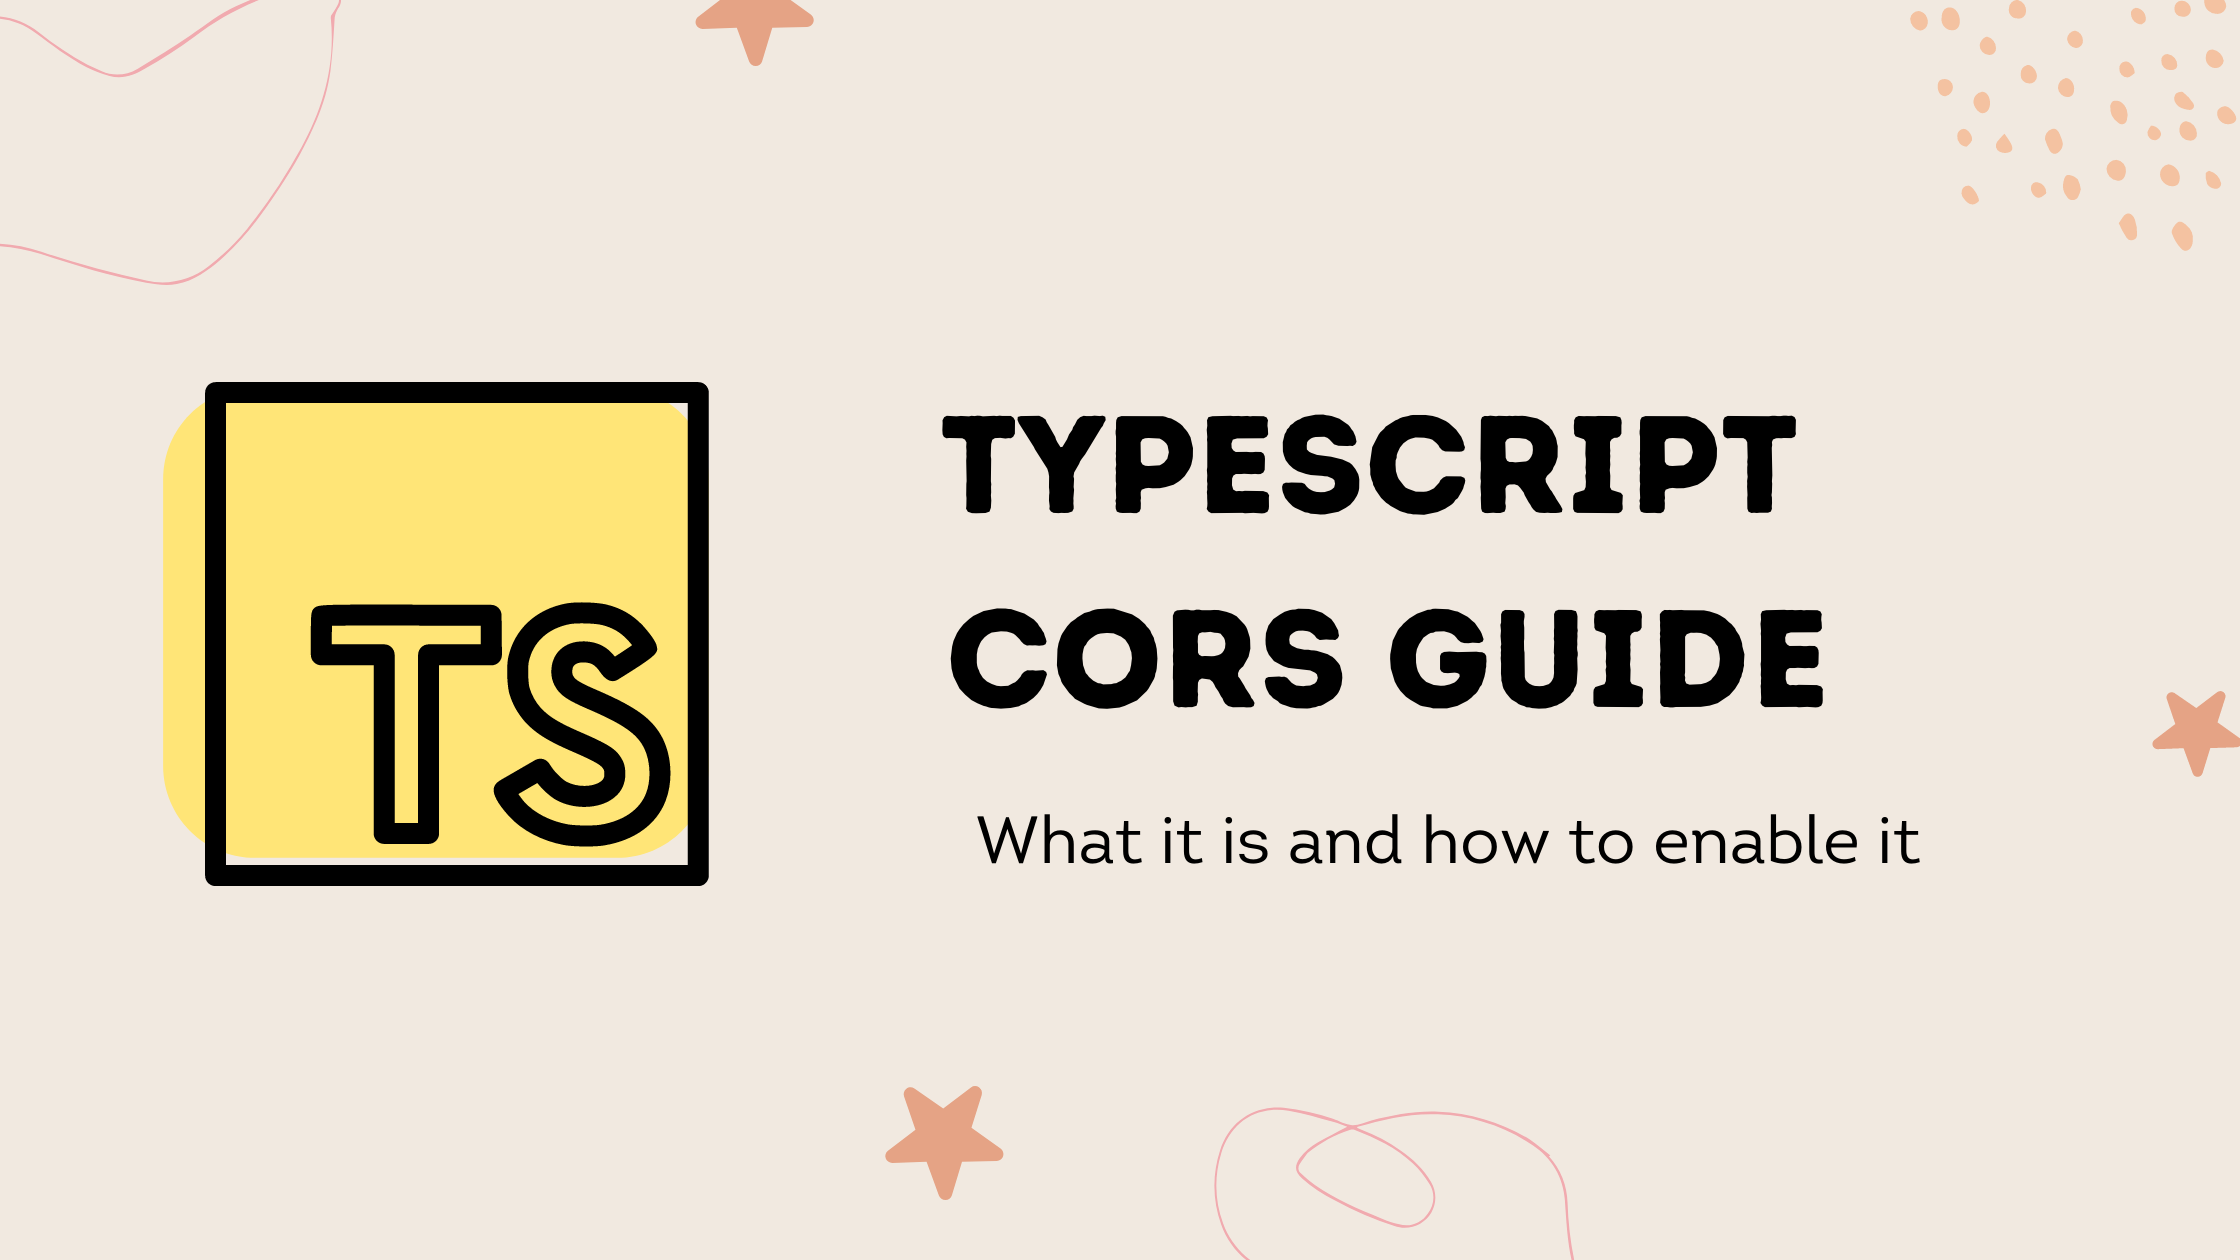 TypeScript CORS Guide: What It Is and How to Enable It - Picture 1 image